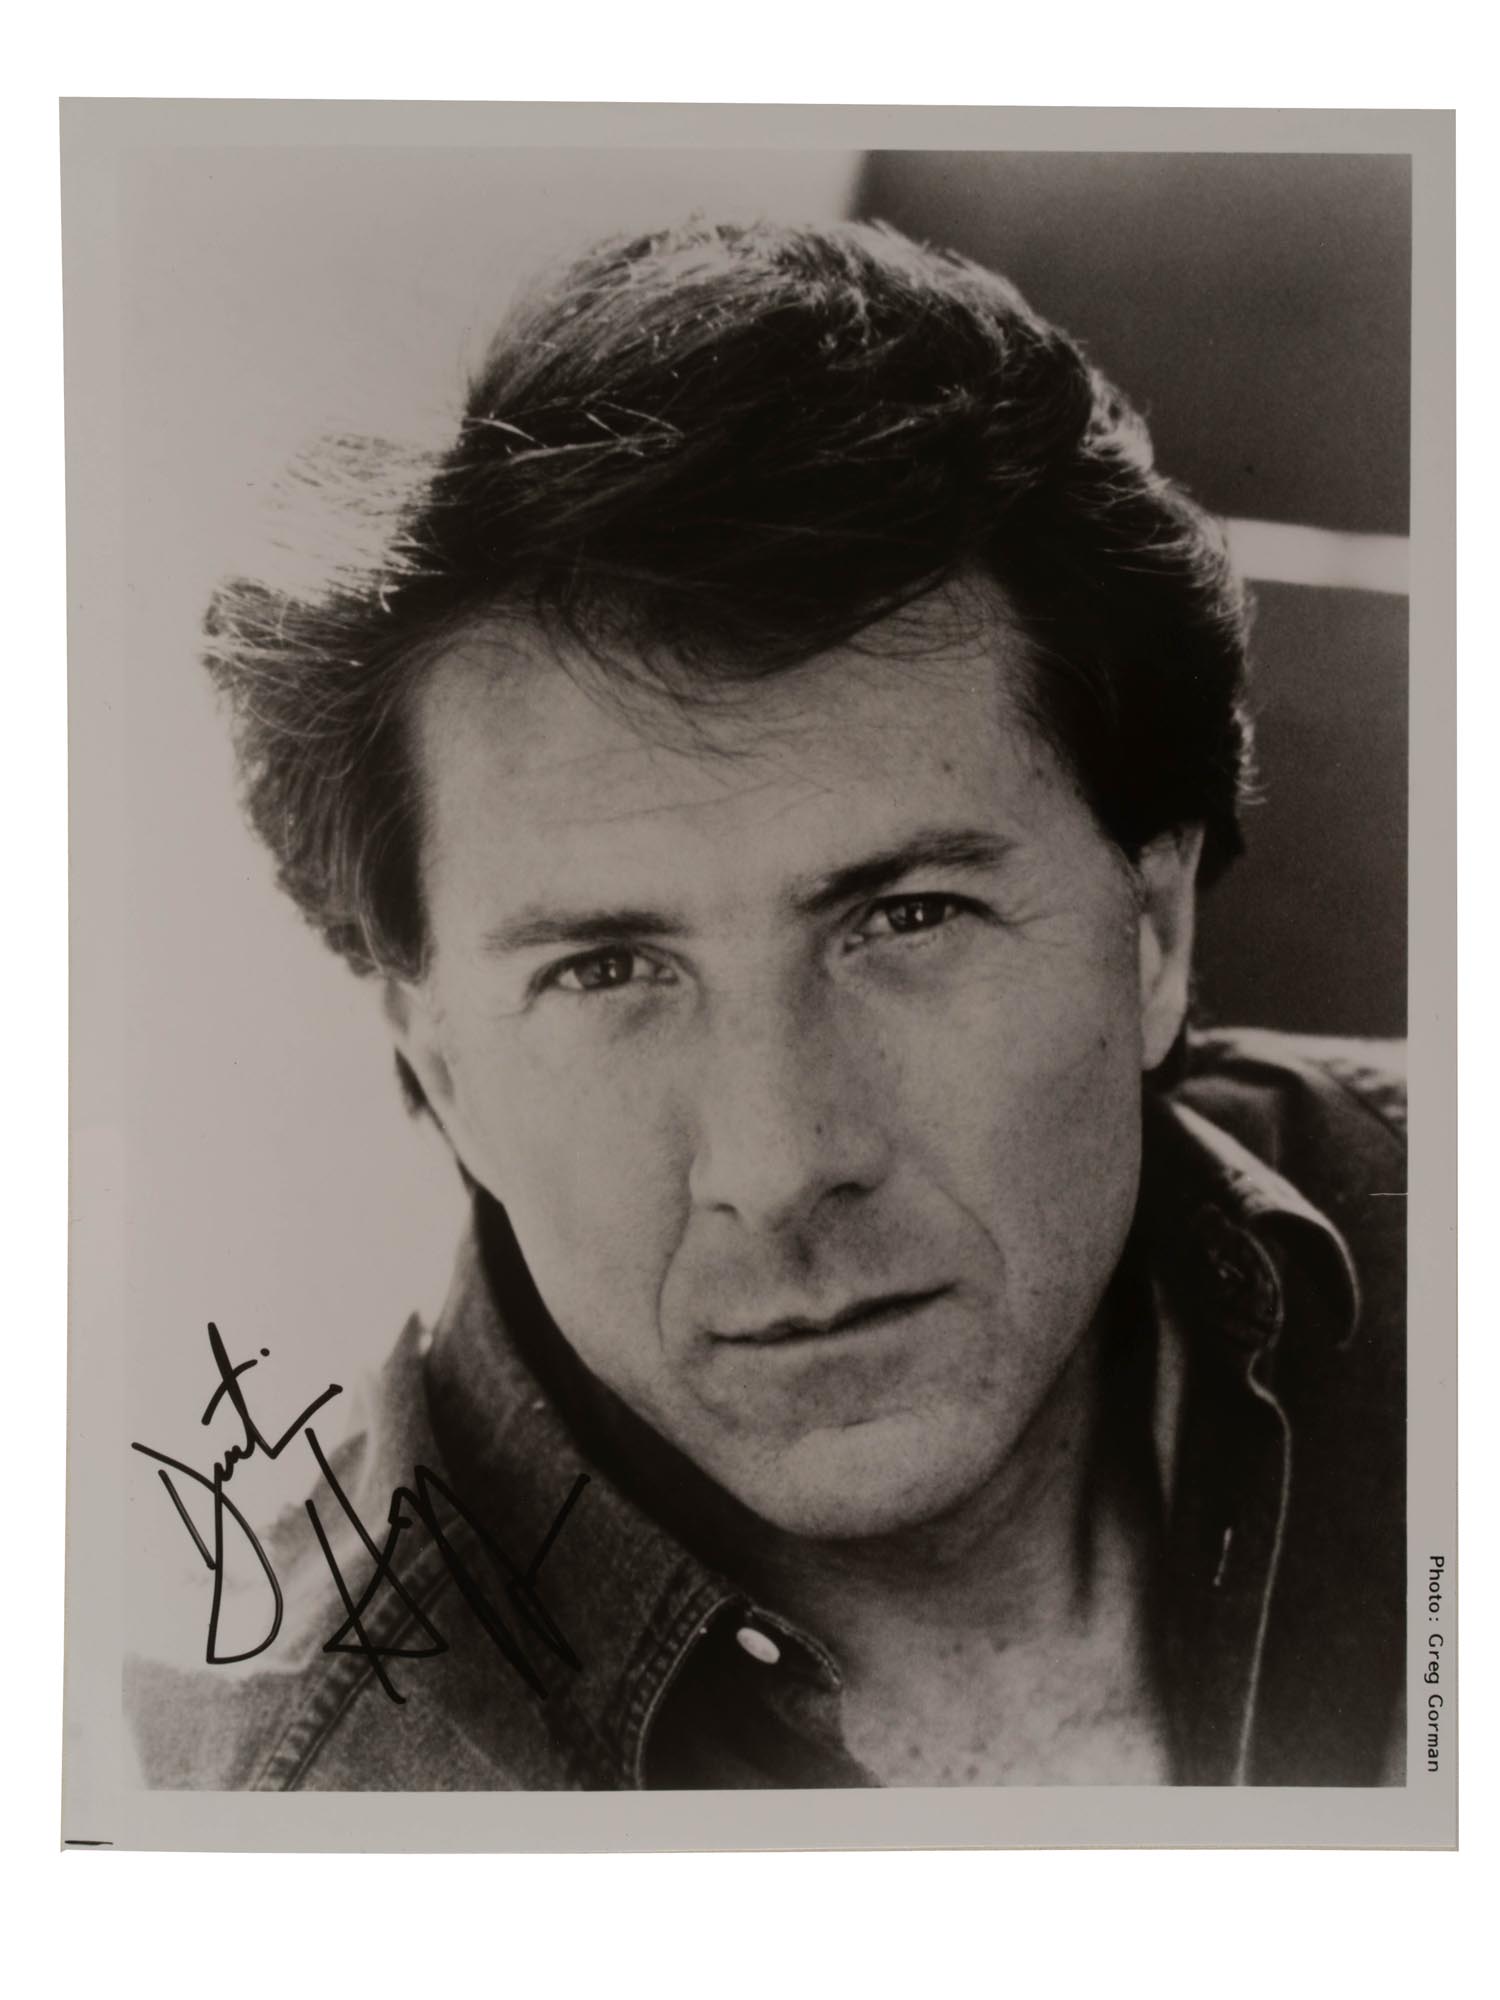 DUSTIN HOFFMAN AND OTHER CELEBRITIES AUTOGRAPHS PIC-2